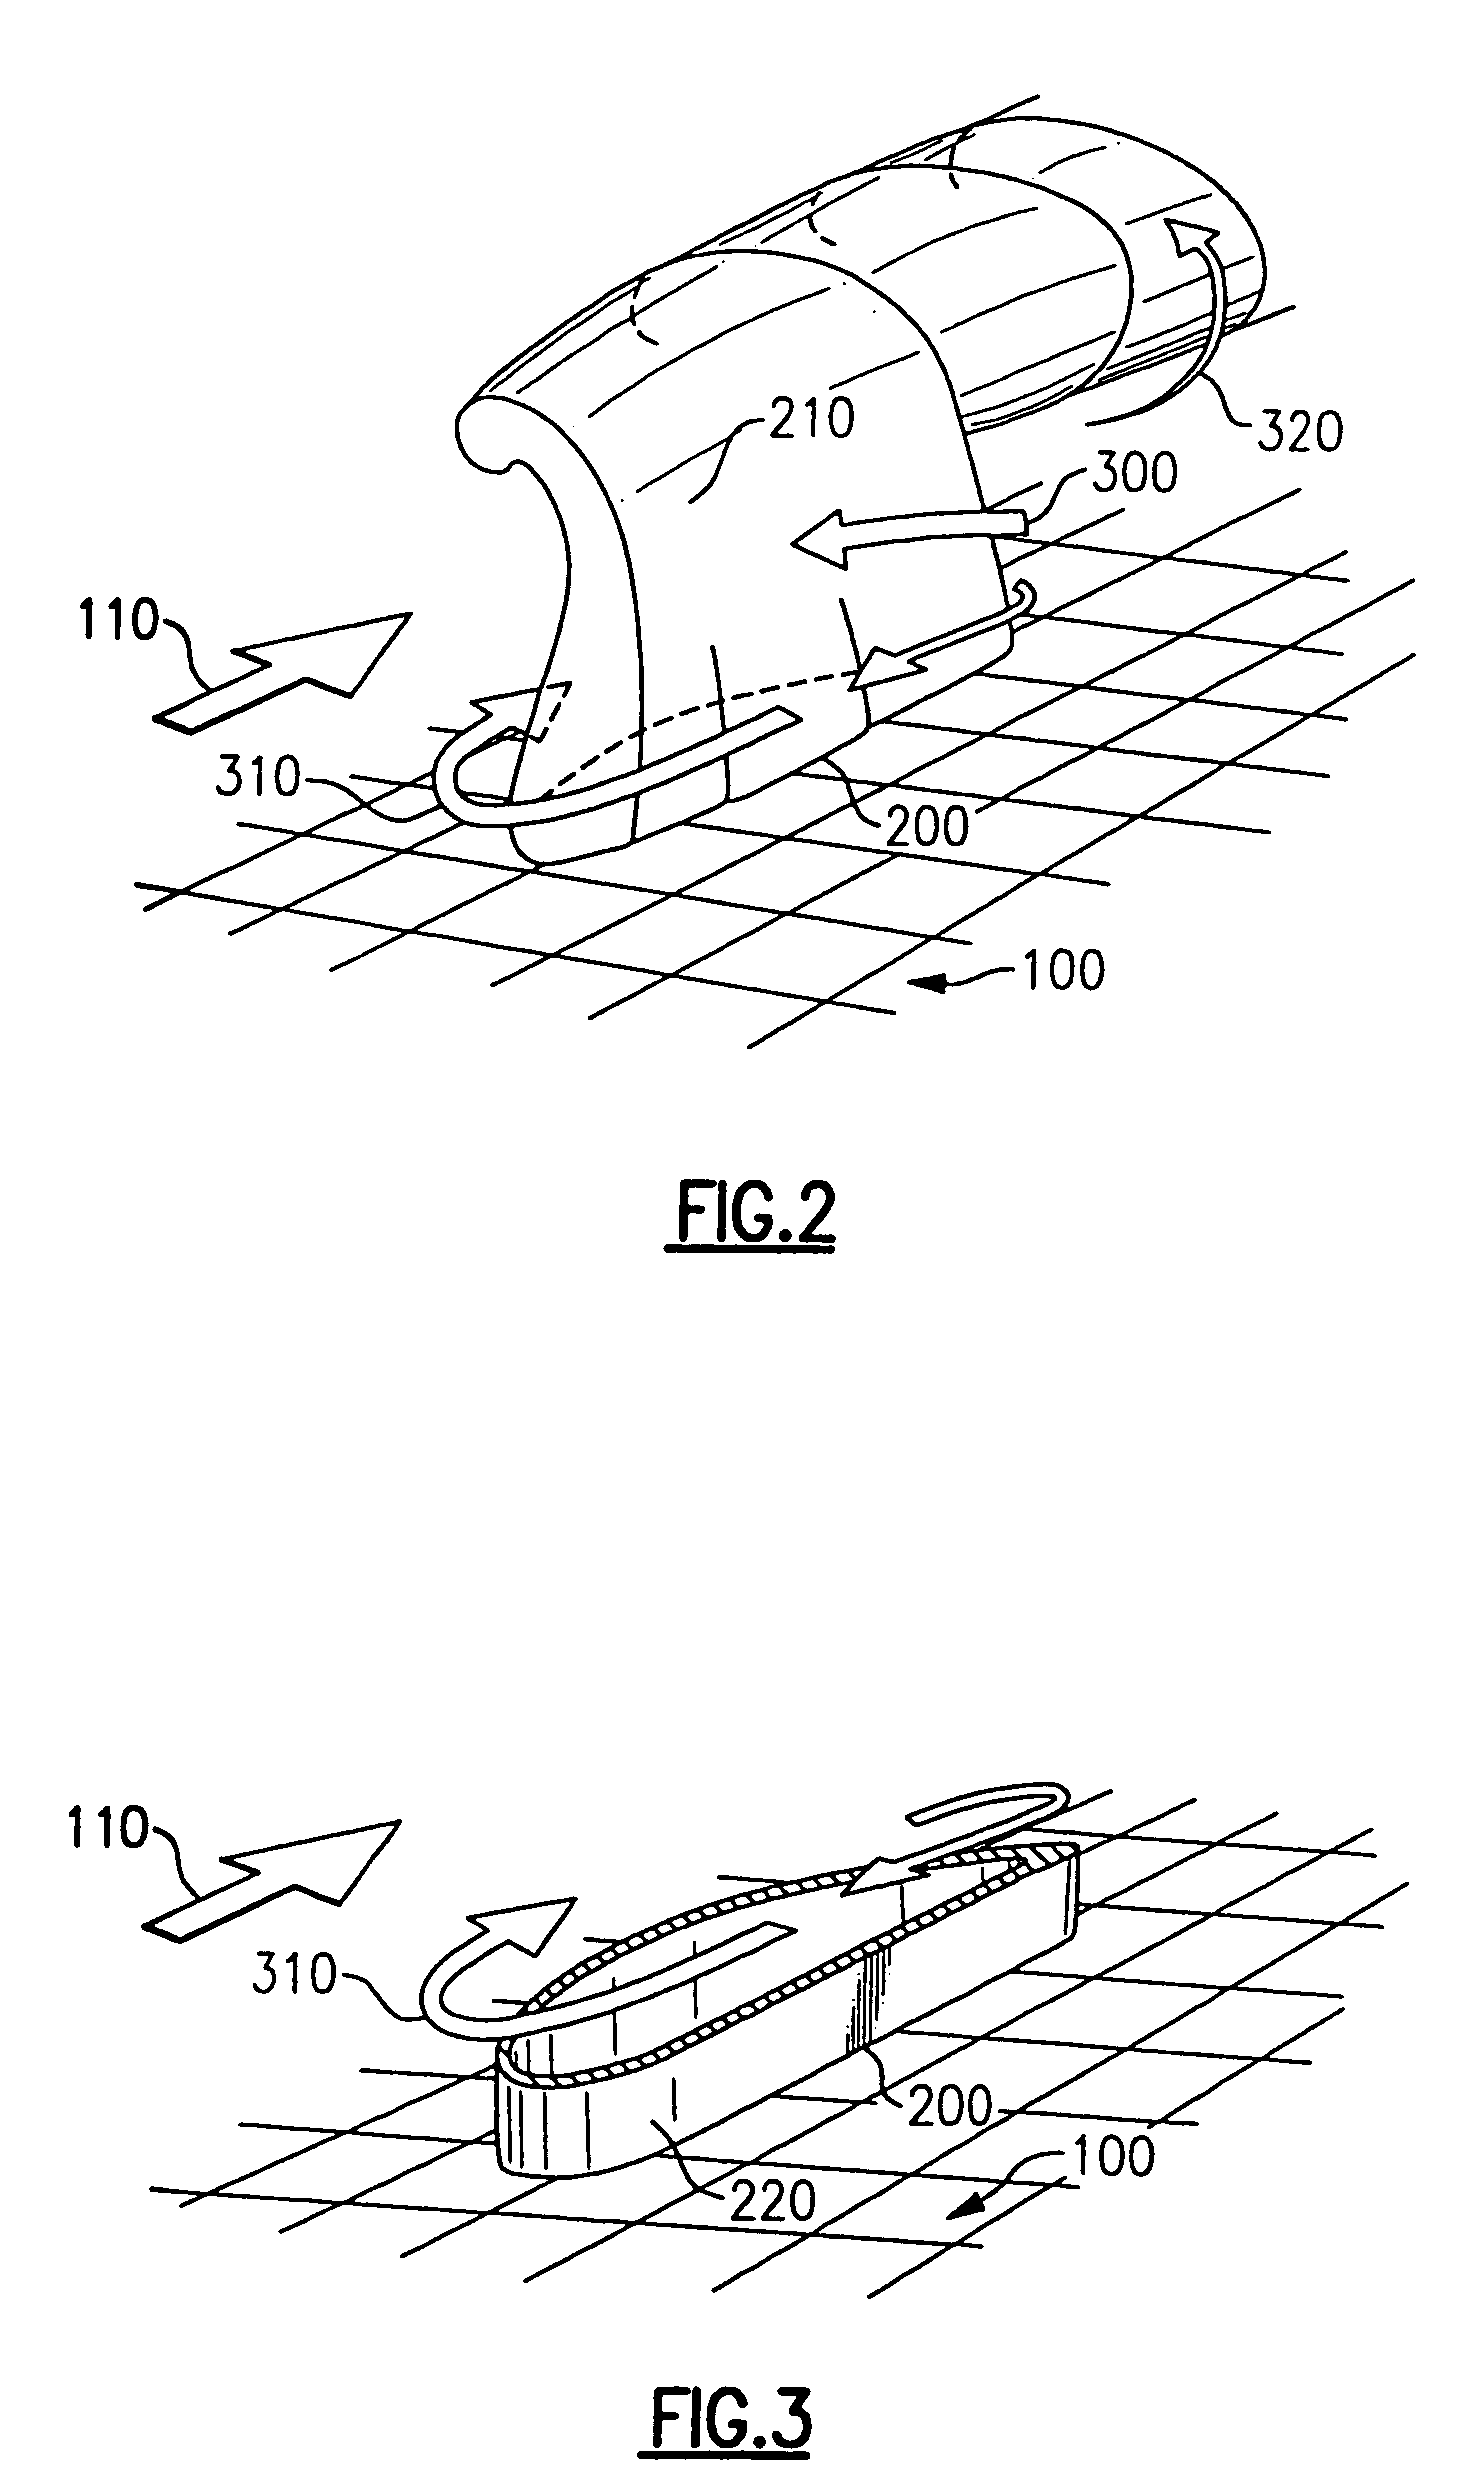 Arrangement for controlling fluid jets injected into a fluid stream